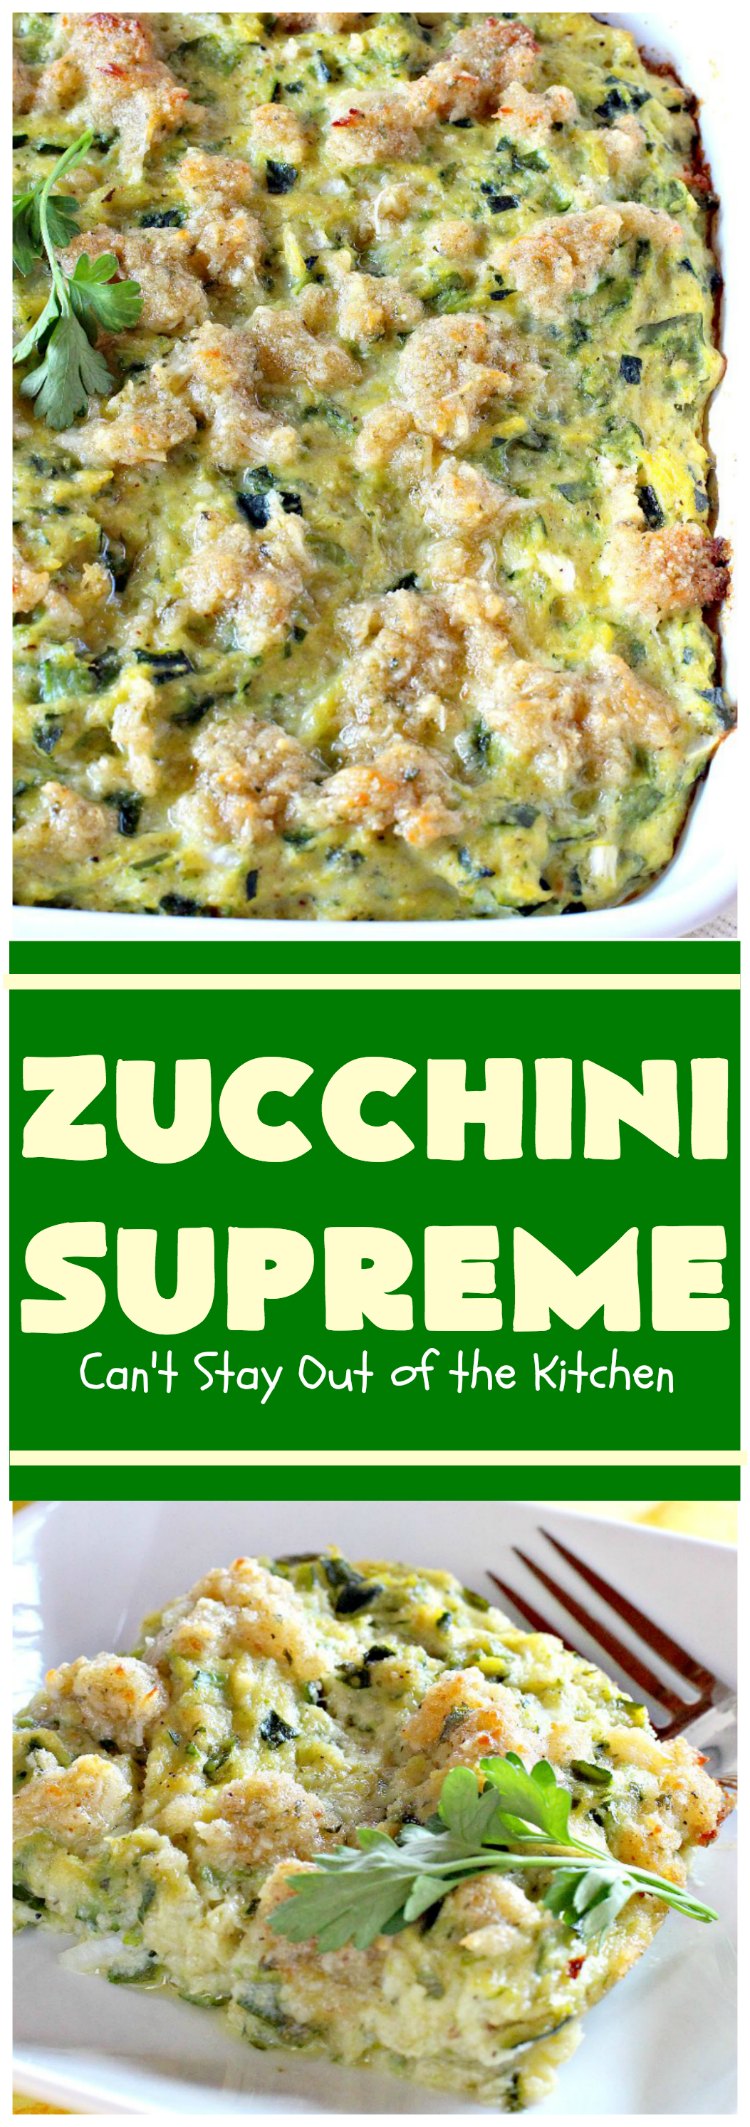 Zucchini Supreme | Can't Stay Out of the Kitchen